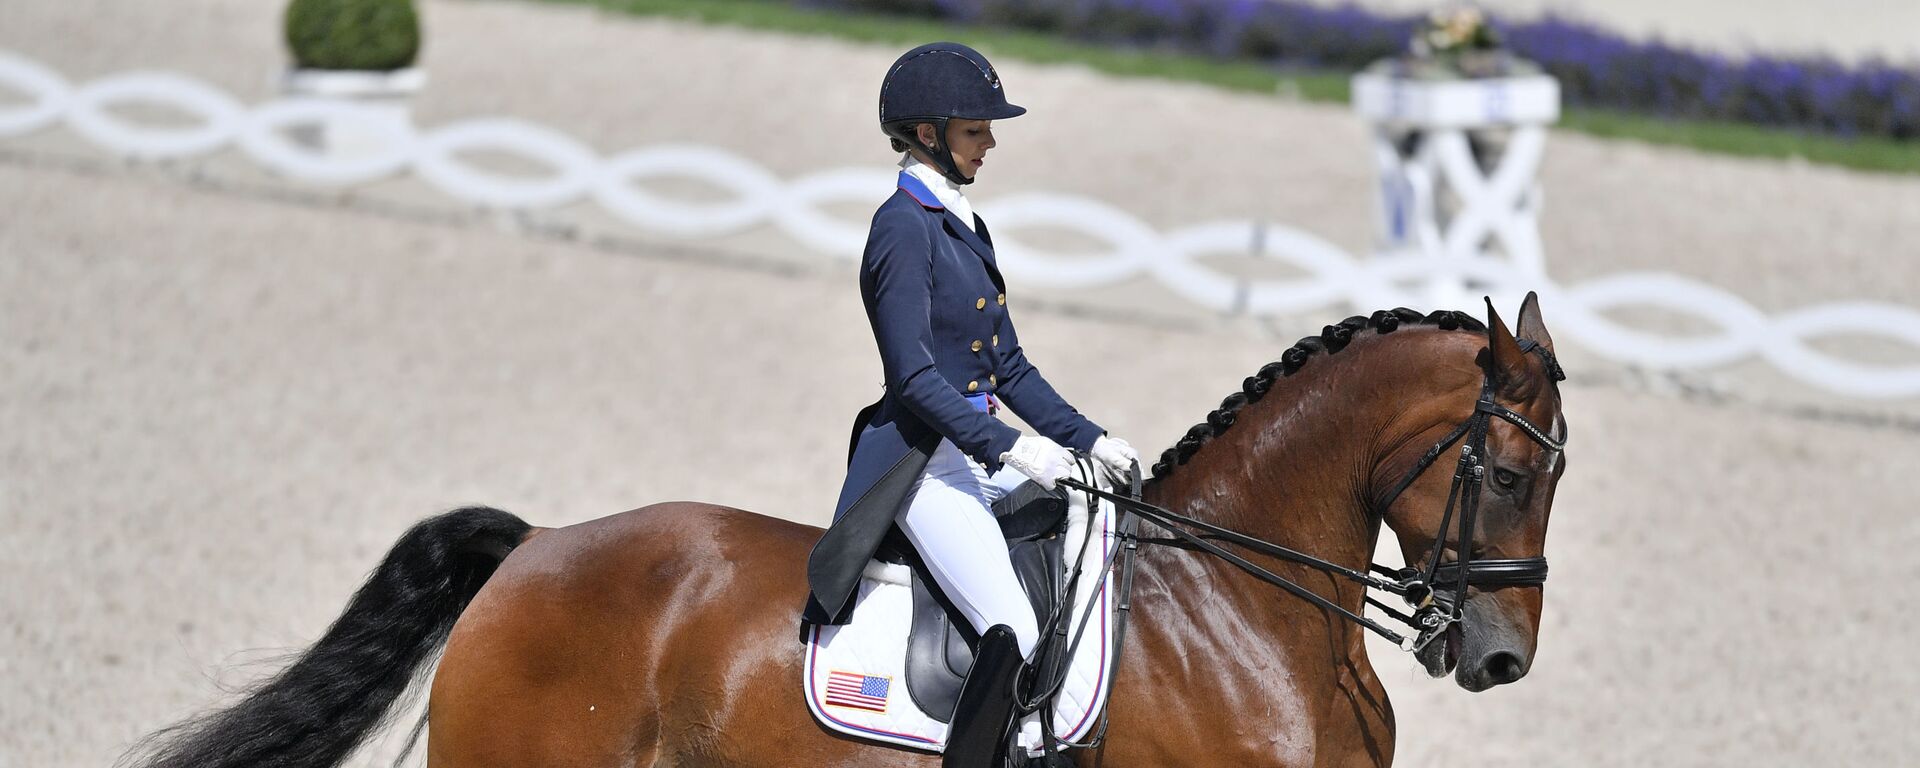 Laura Graves of the USA performs on Verdades at the Grand Prix Freestyle Dressage CDIO at the CHIO Equestrian Festival in Aachen, Germany, Sunday, July 23, 2017 - Sputnik International, 1920, 24.08.2019